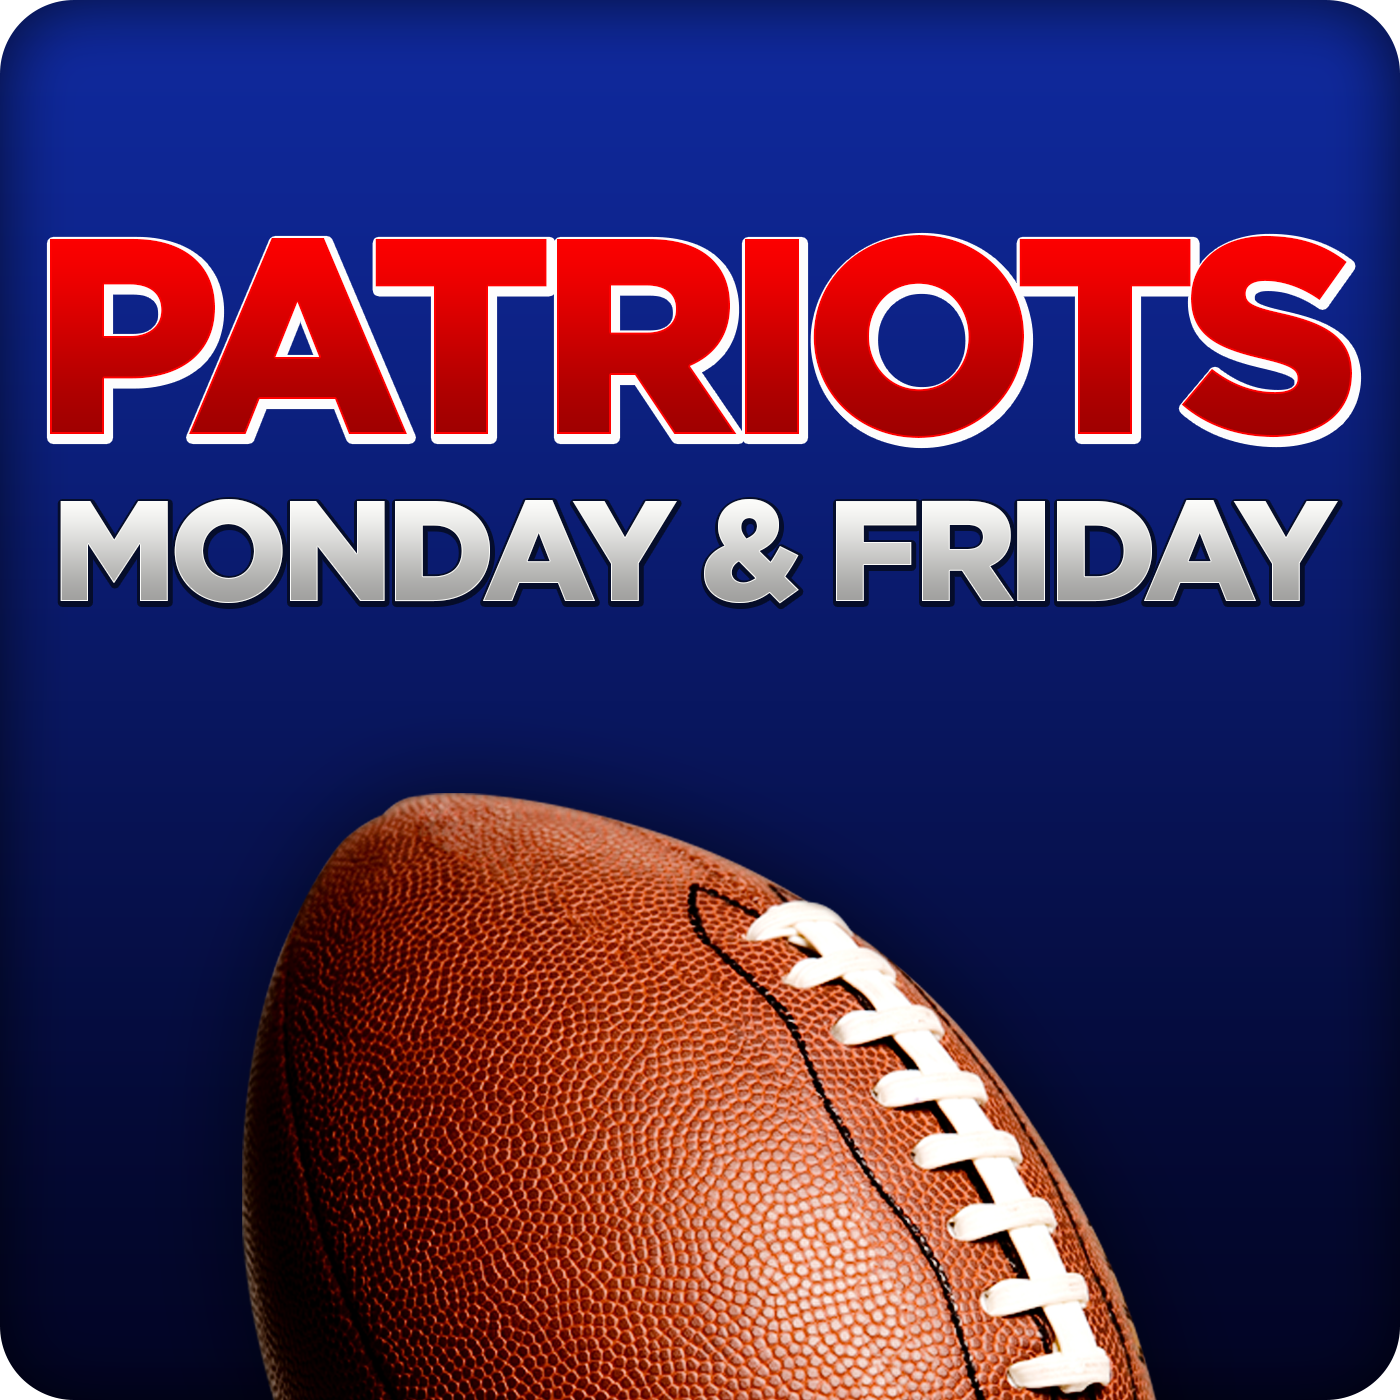 Tom E. Curran on the best players on the Patriots roster